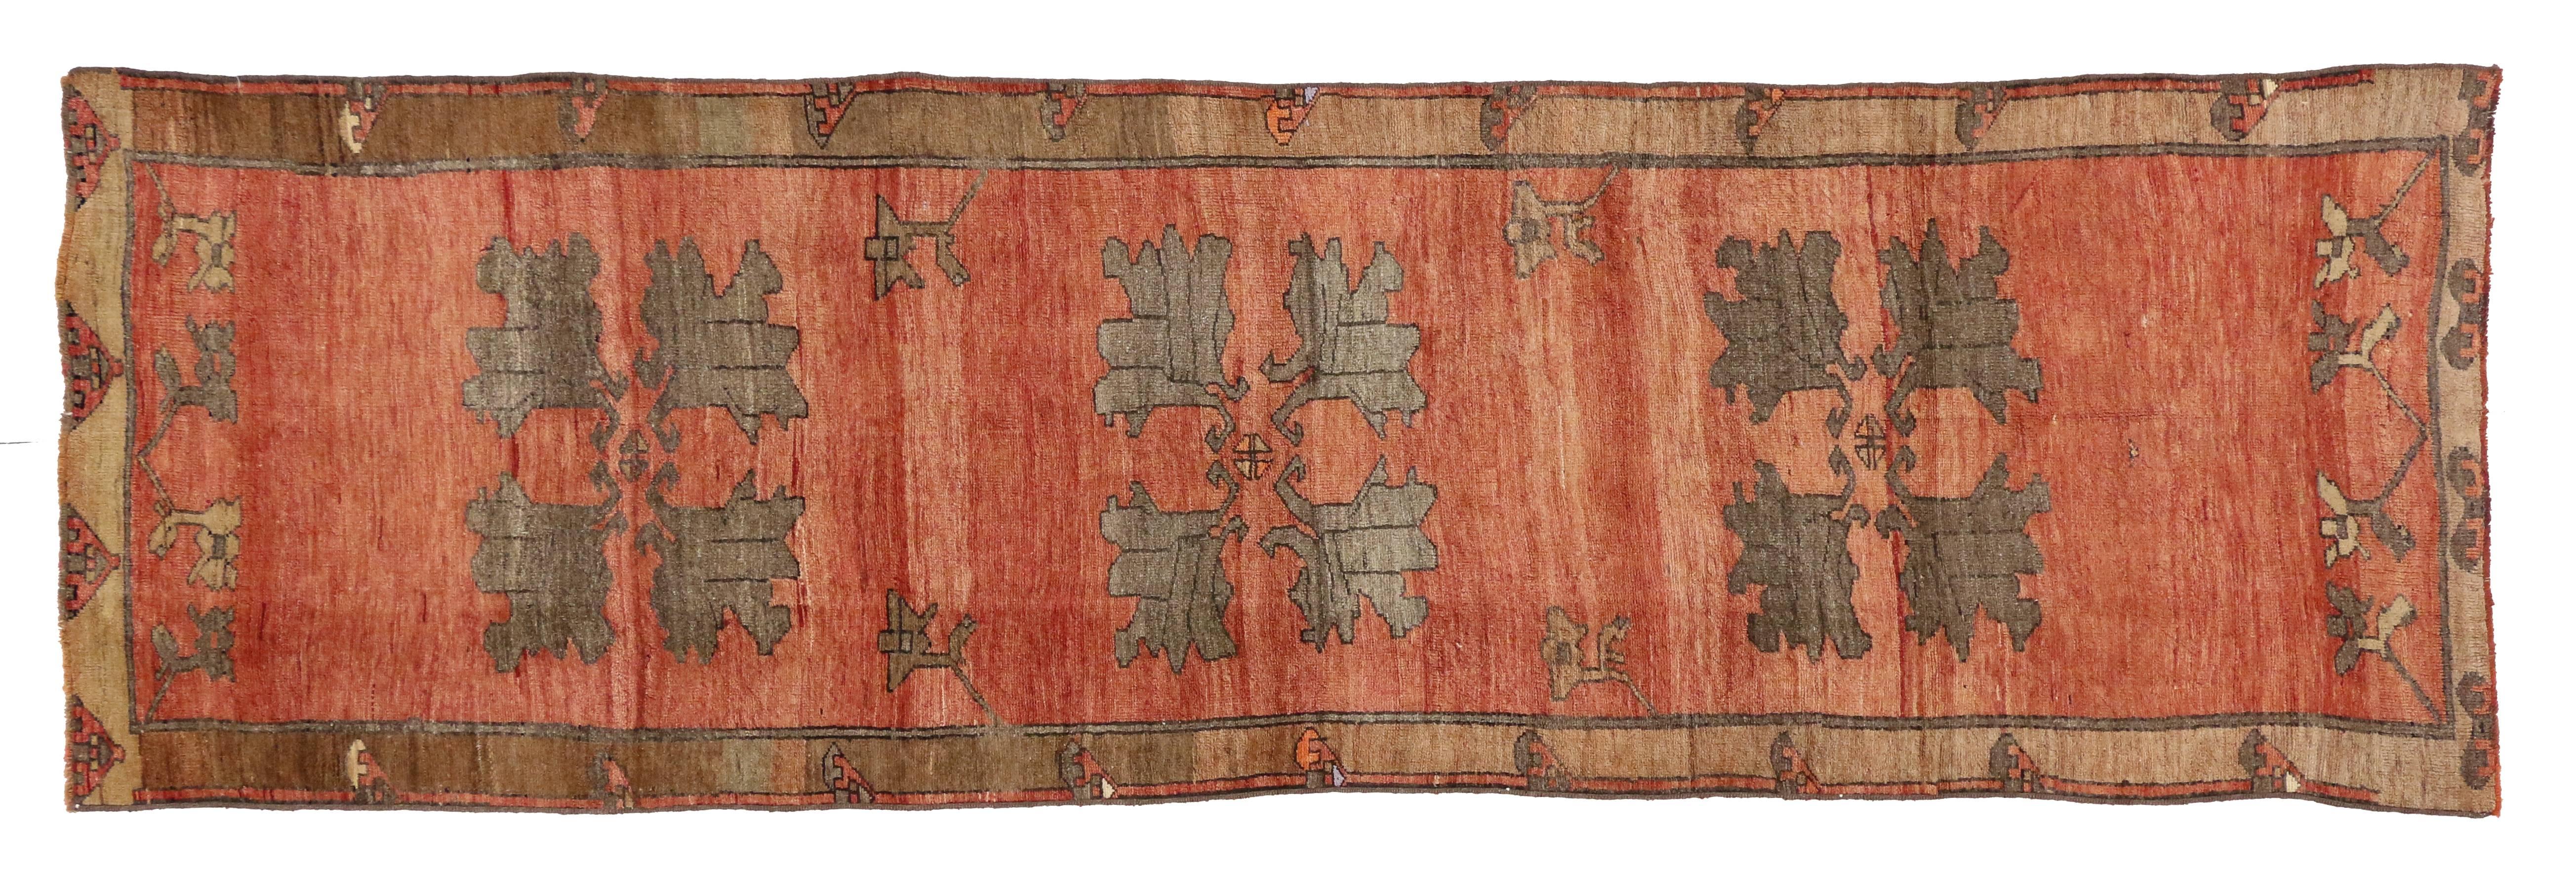 50188, an antique Turkish Oushak rug runner in traditional style. This luxurious Oushak runner features three lush palmettes with angular petals in taupe-slate and cloudy grey on an abrashed red field. The vintage Oushak runner is bordered in a